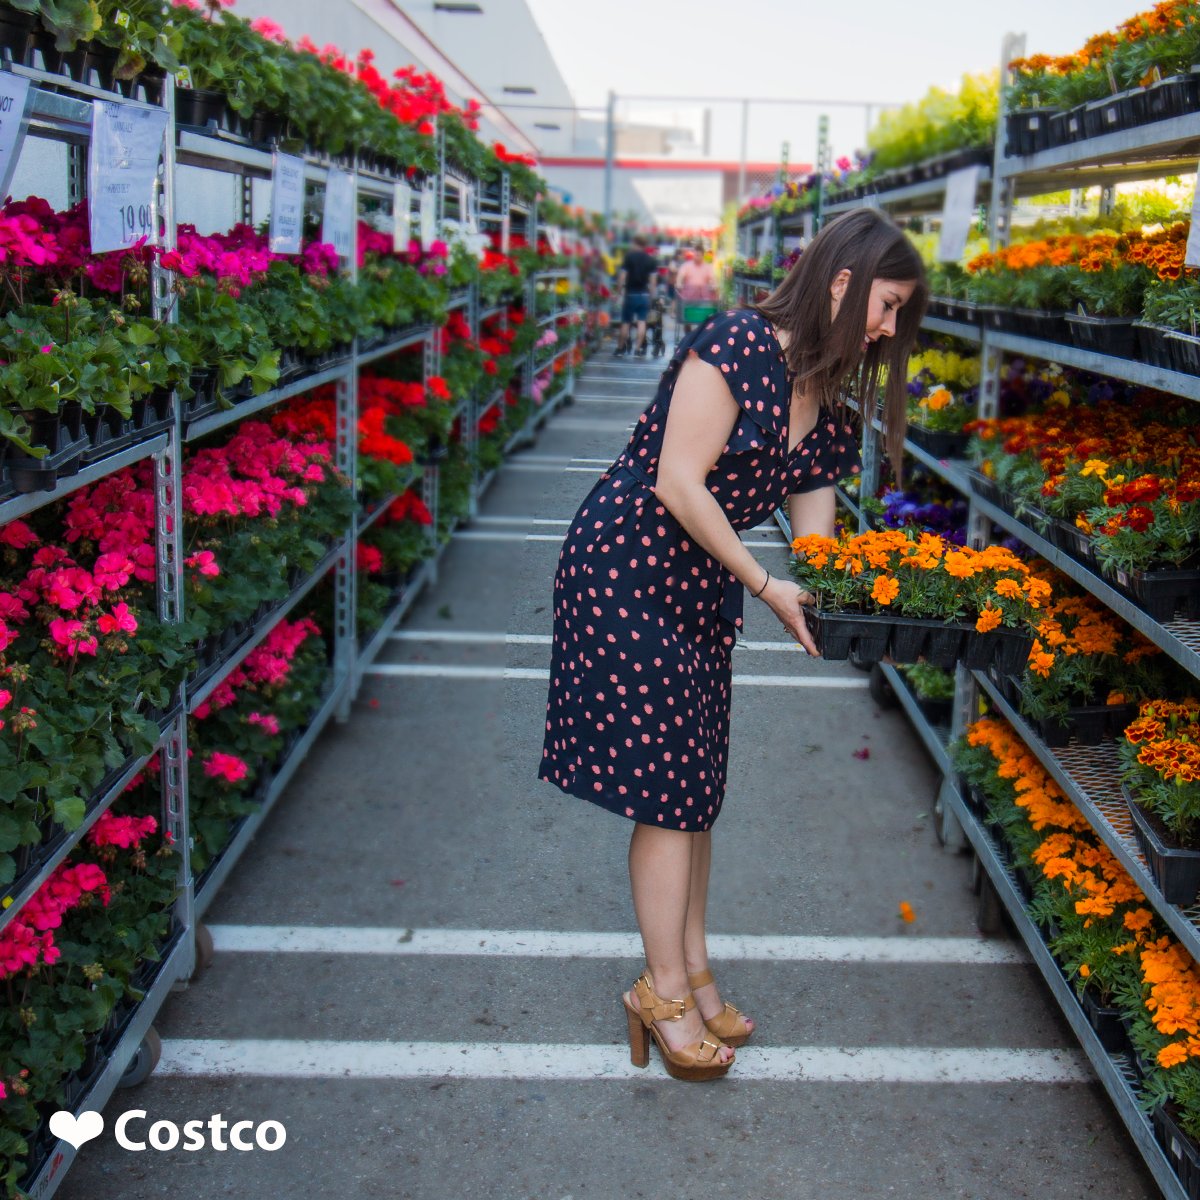 Costco Canada On Twitter Time To Beautify Your Garden Visit